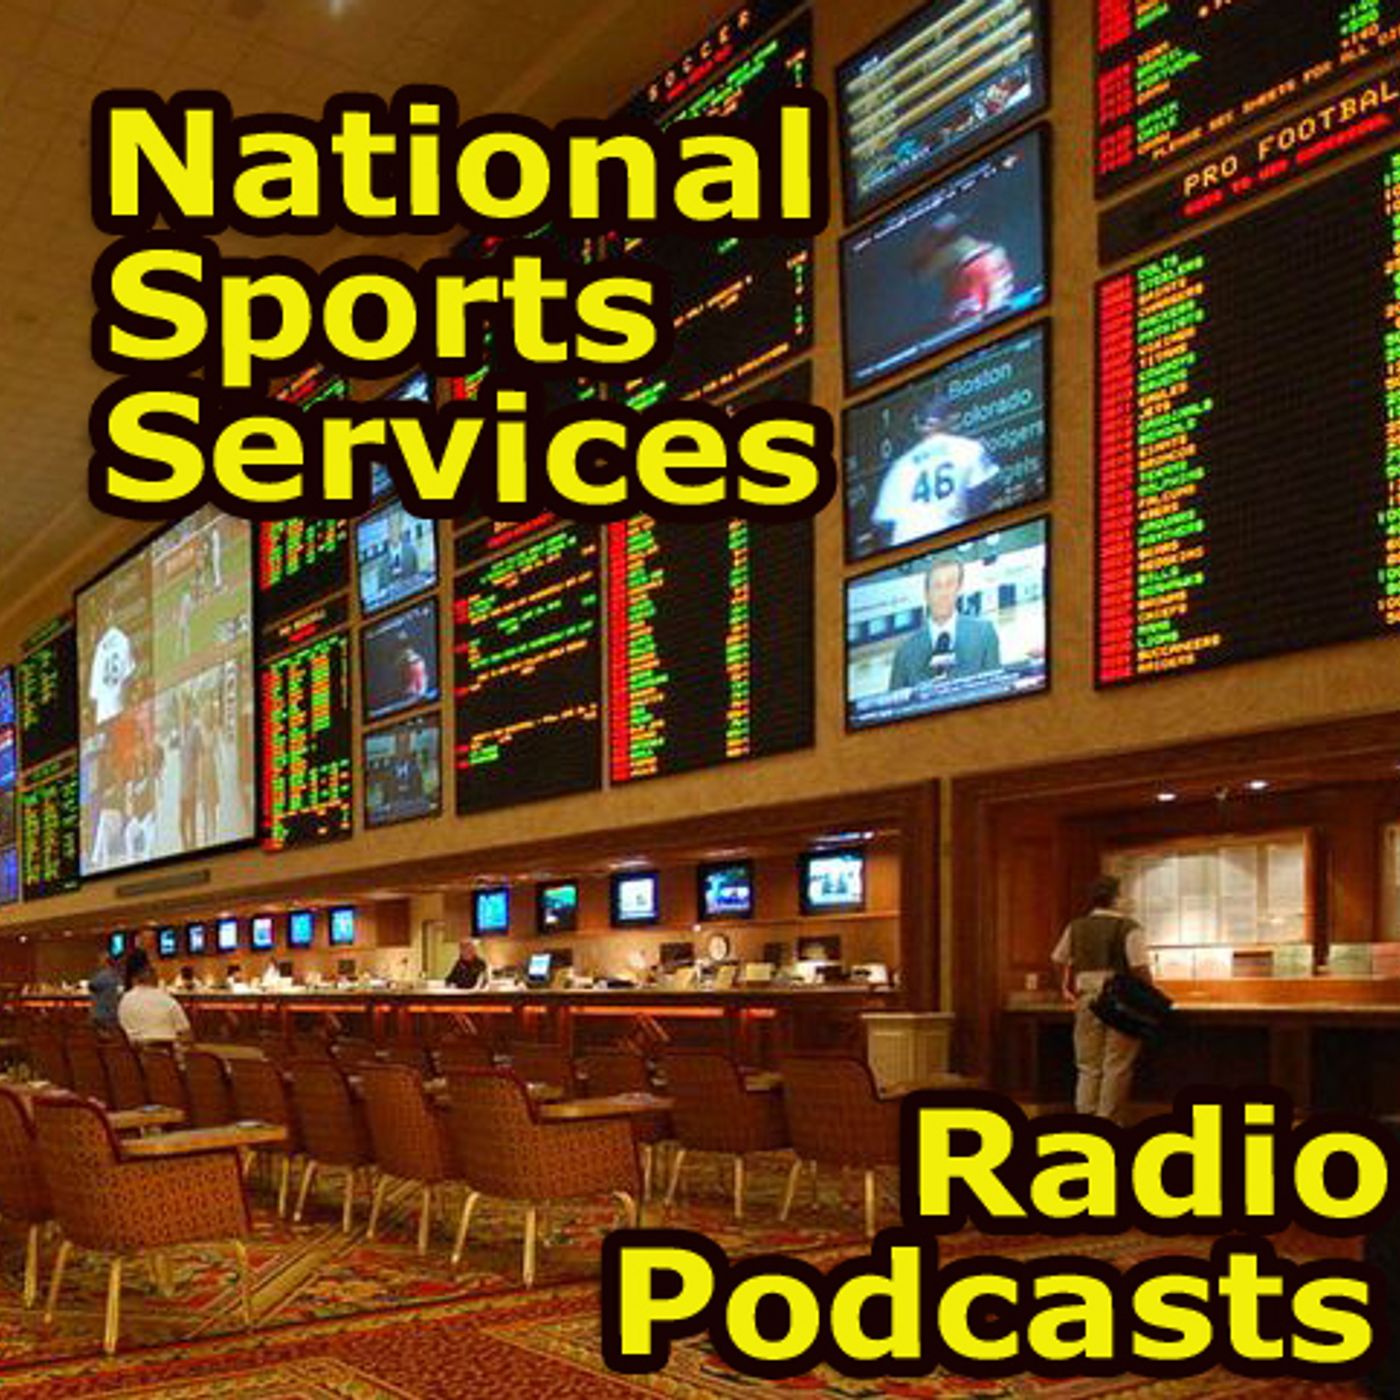 National Sports Services Radio Podcasts